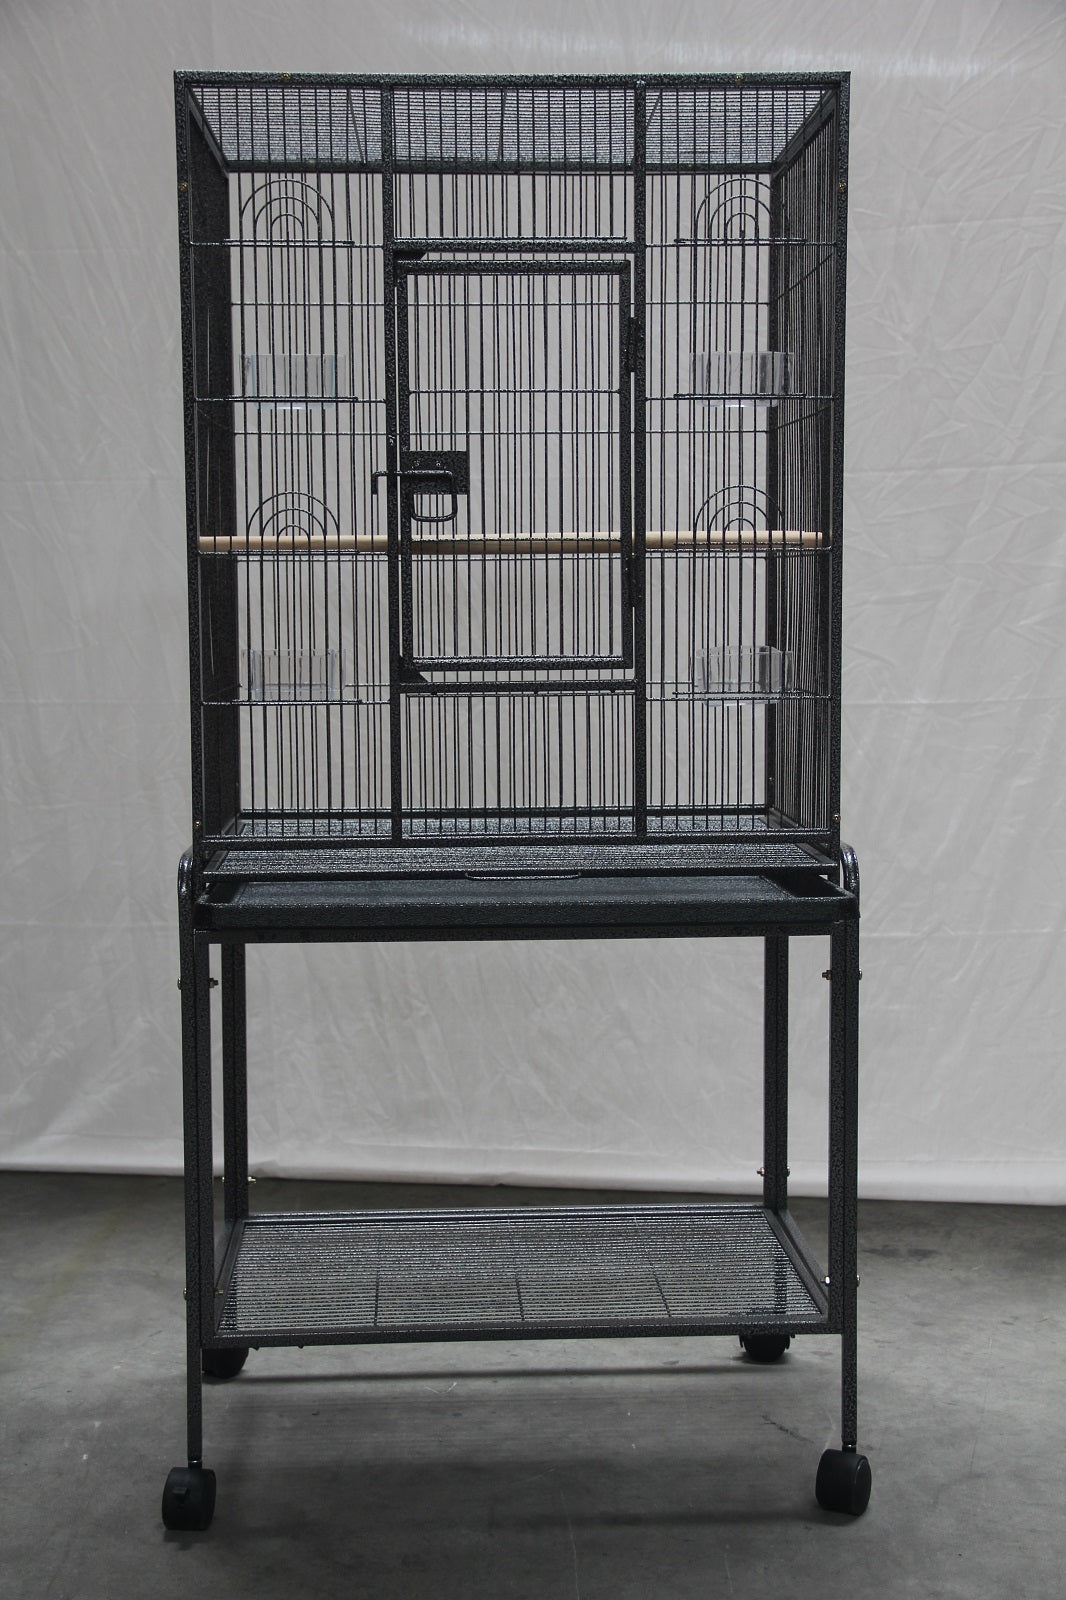 YES4PETS 135cm Bird Cage Parrot Aviary Pet Stand-alone Budgie Perch Castor Wheels - 0